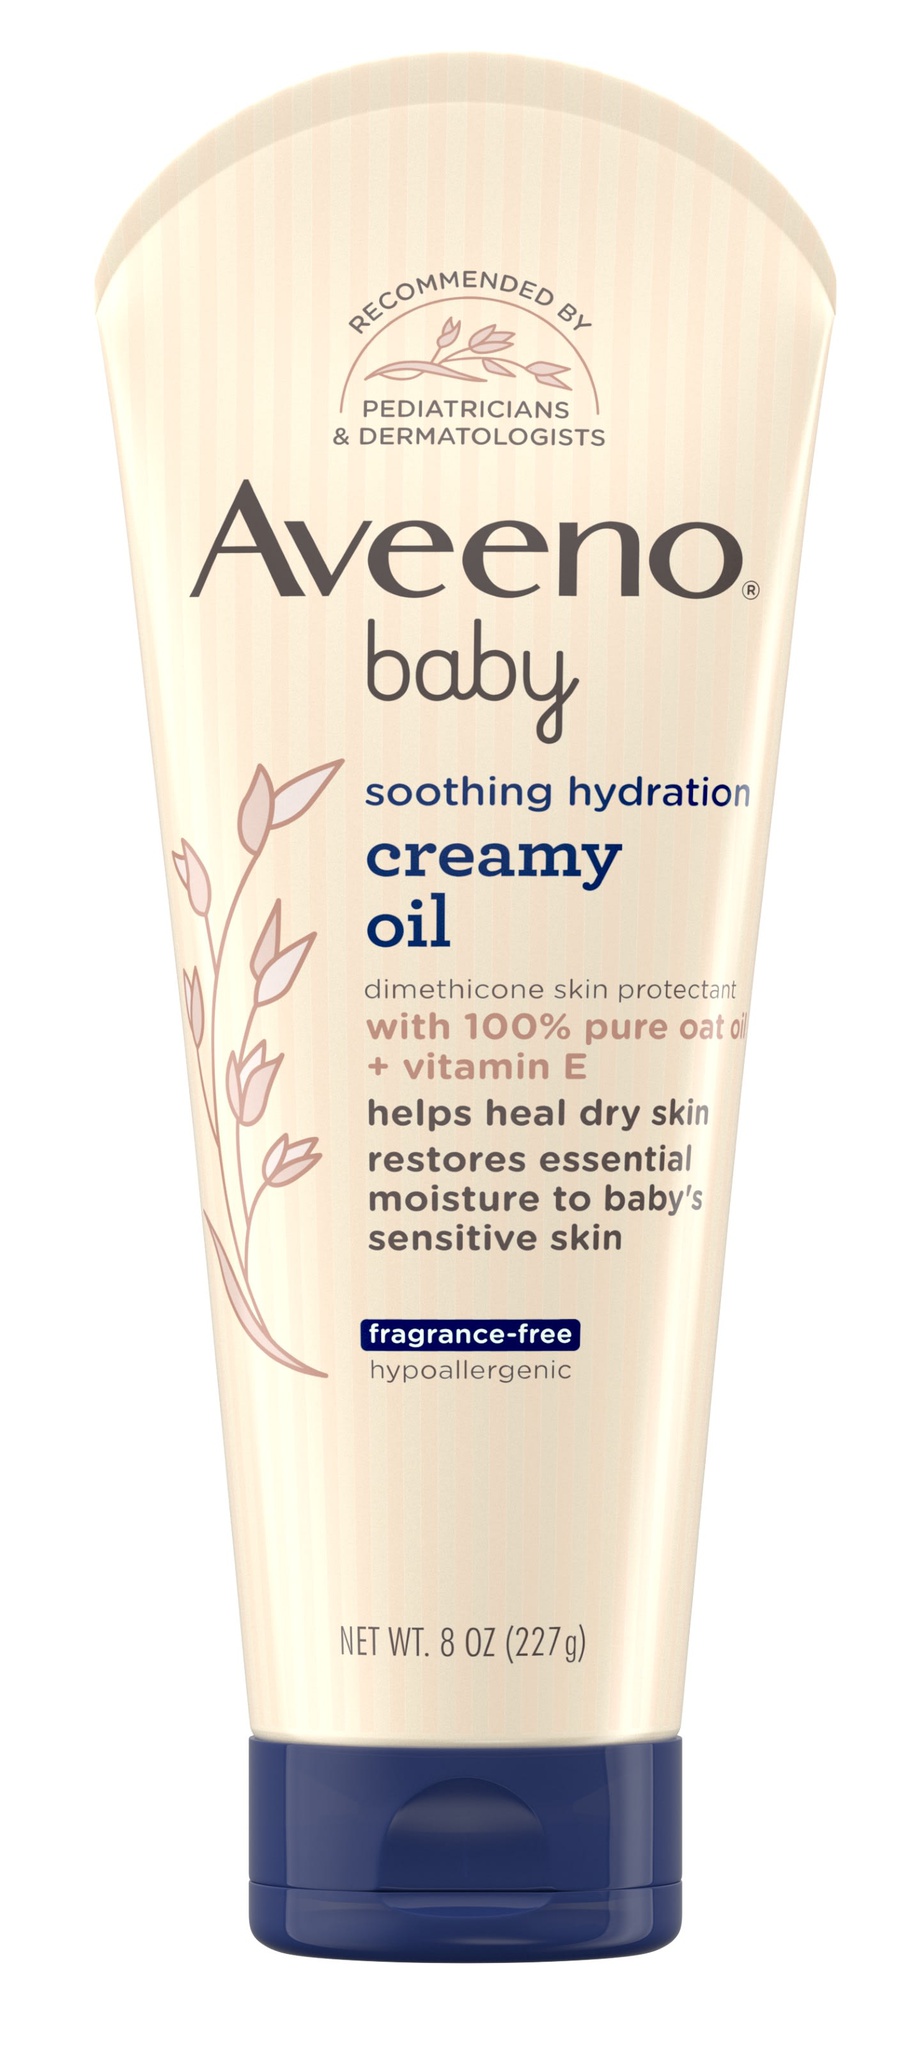 Aveeno Baby Soothing Hydration Creamy Oil